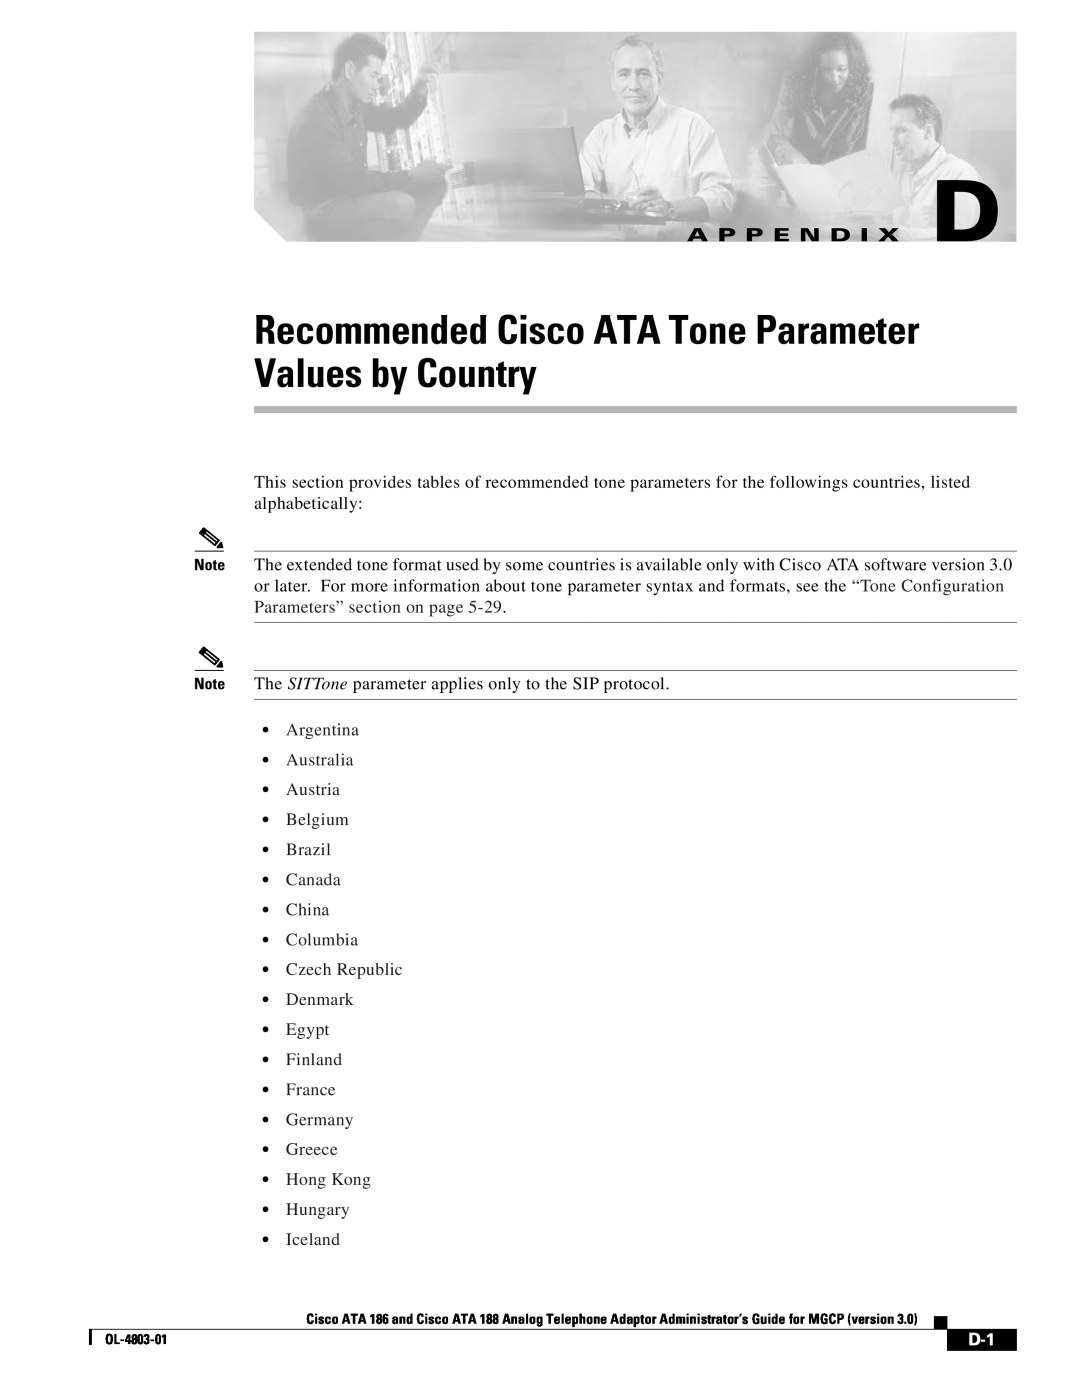 Cisco Systems ATA 186 manual Recommended Cisco ATA Tone Parameter Values by Country, A P P E N D I X D, Hungary Iceland 